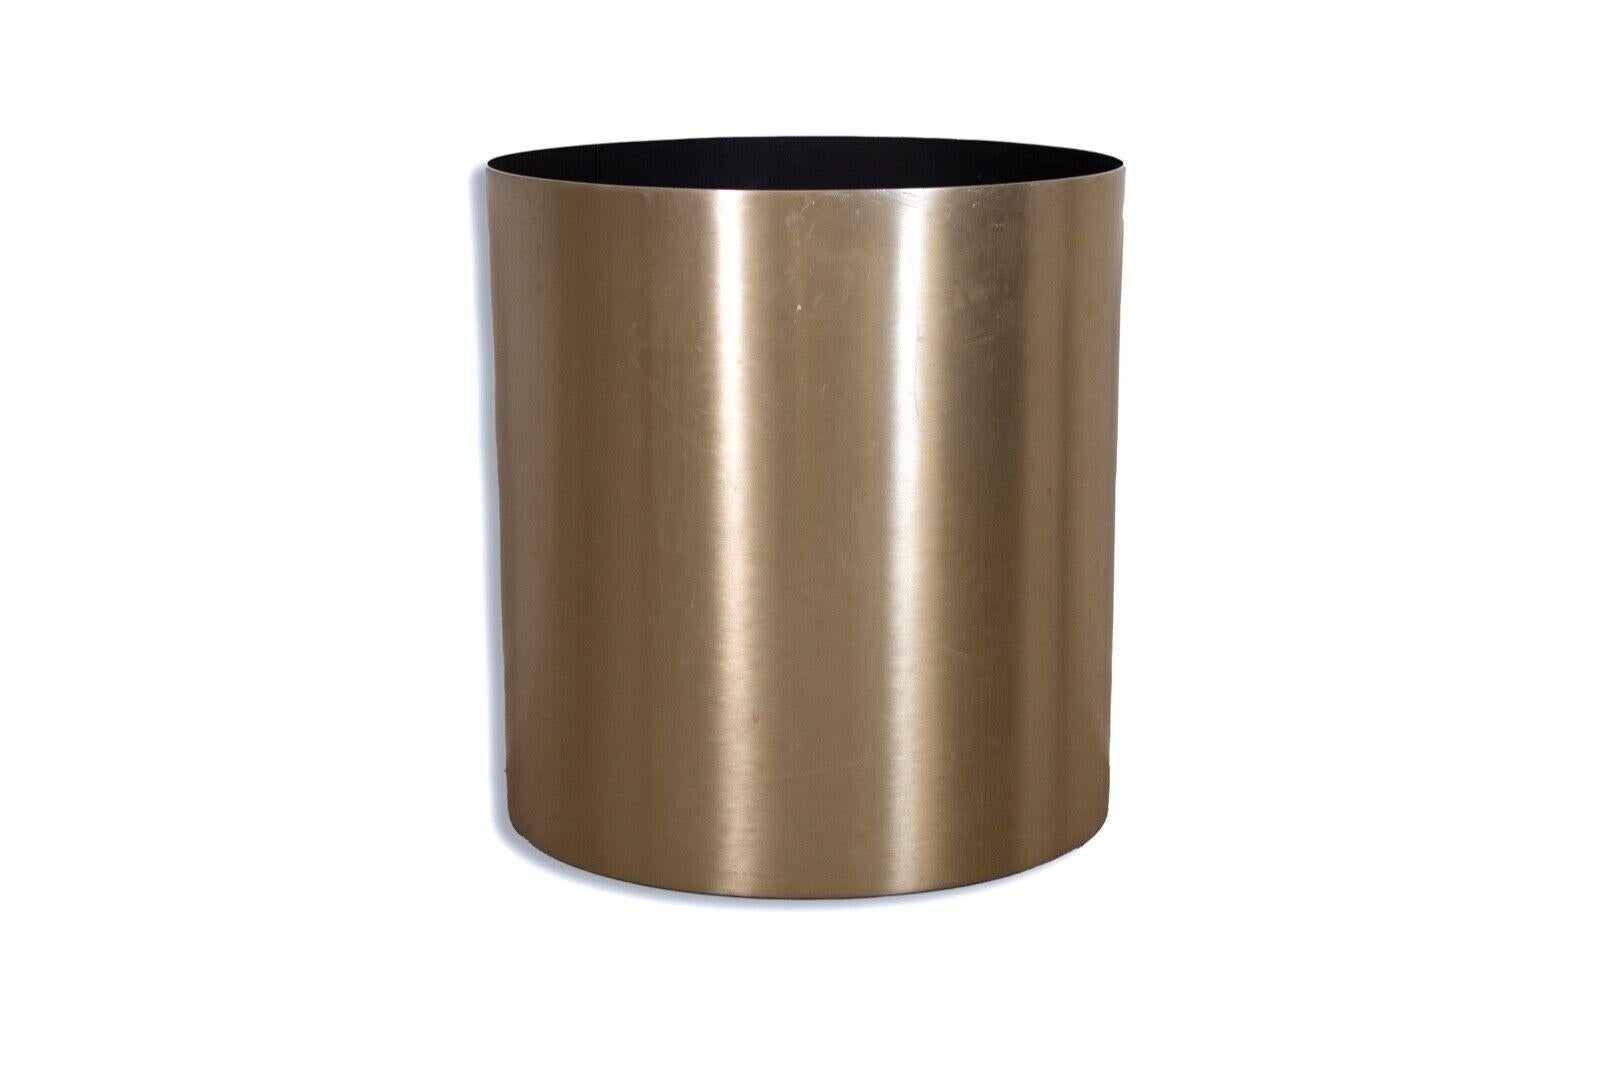 The brushed steel cylinder planter is a sleek and sophisticated choice for adding a touch of modern elegance to any indoor or outdoor space. Crafted with precision, this planter showcases a cylindrical shape with clean lines and a brushed steel